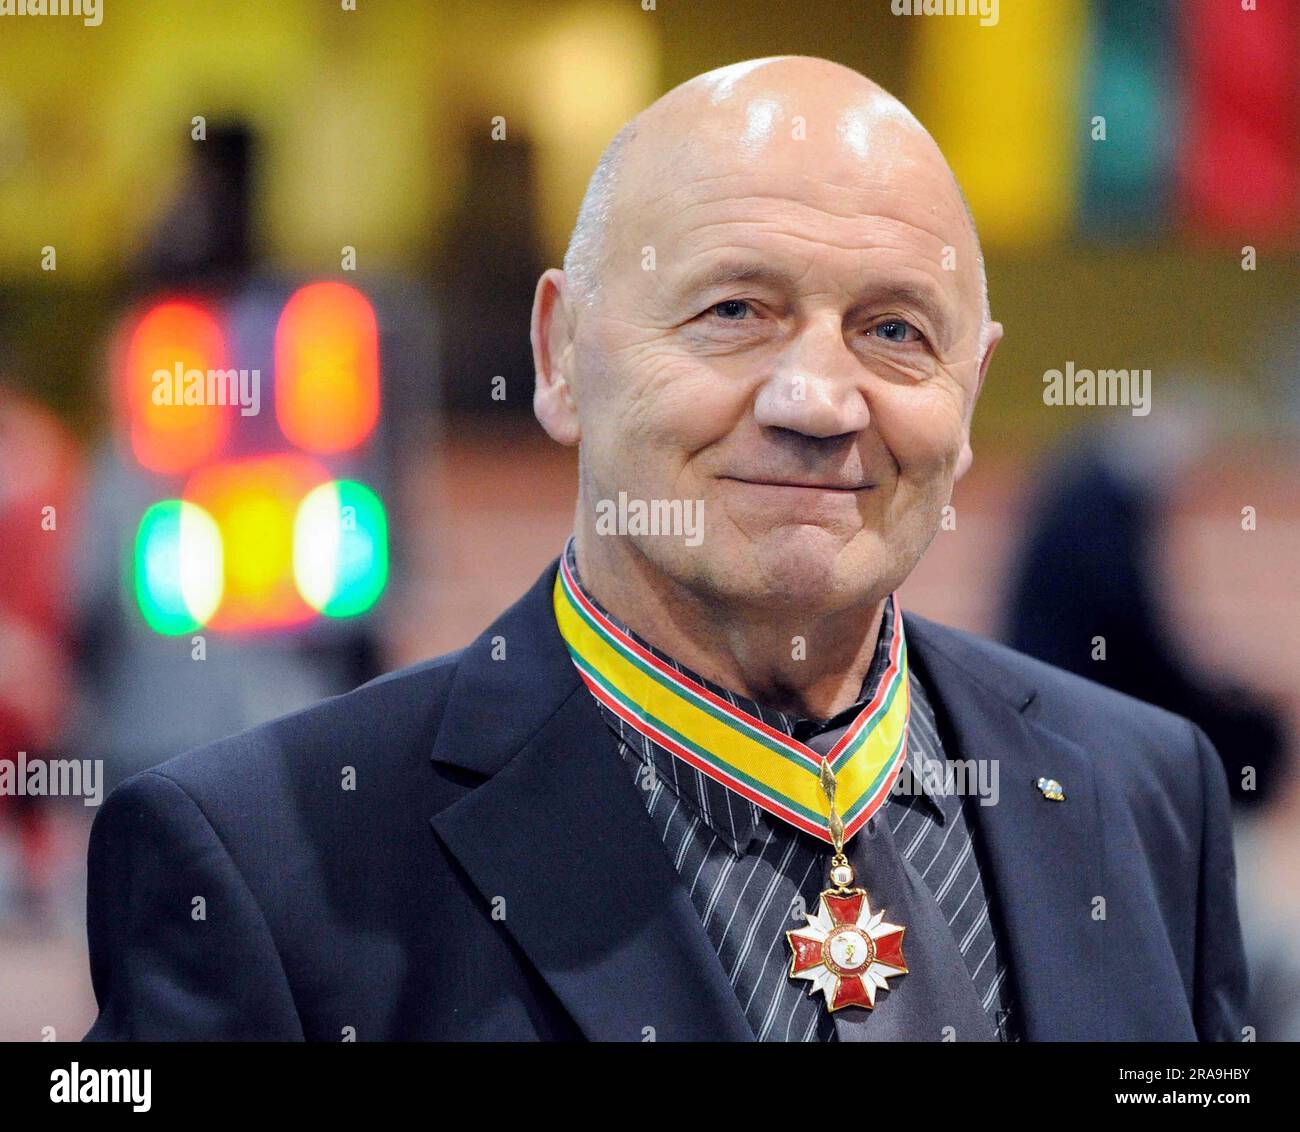 2008 11 29. Rimantas Bagdonas - Lithuanian athlete, wrestler, the only Lithuanian wrestler who became world champion. Stock Photo